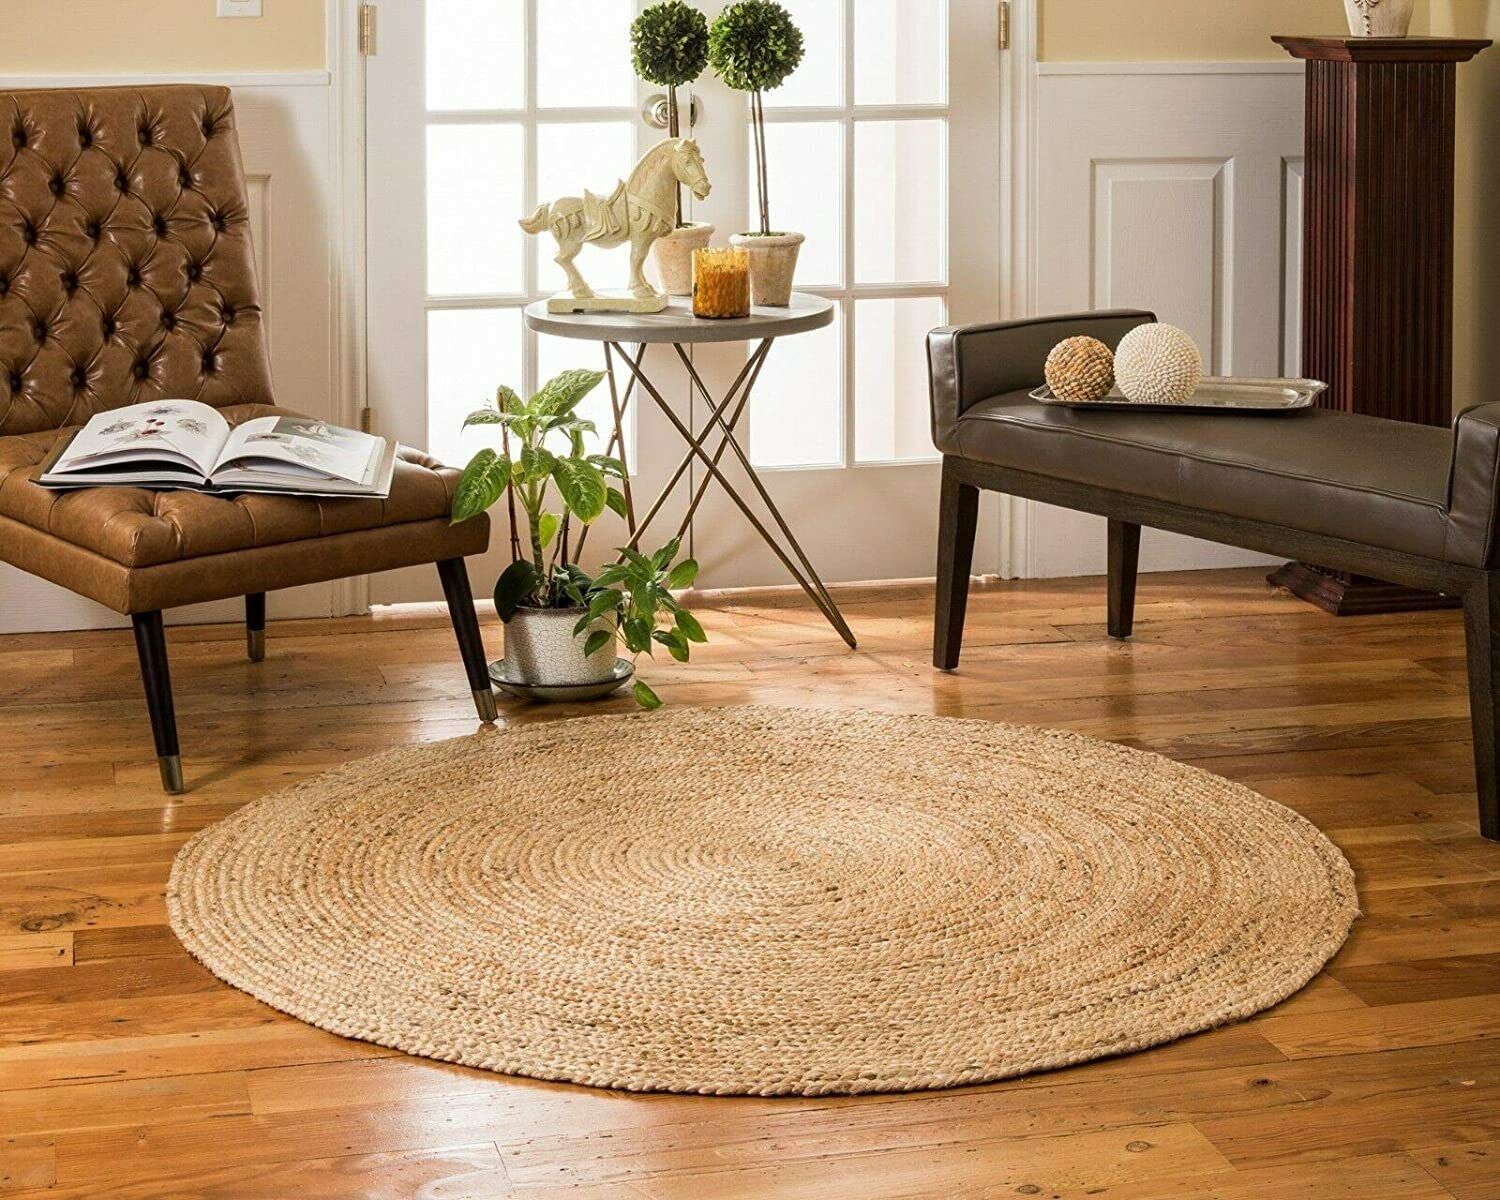 120cm, Hand Woven Braided Jute Area Rug, Round, Reversible,color May Vary |  Ebay With Hand Woven Braided Rugs (Photo 11 of 15)